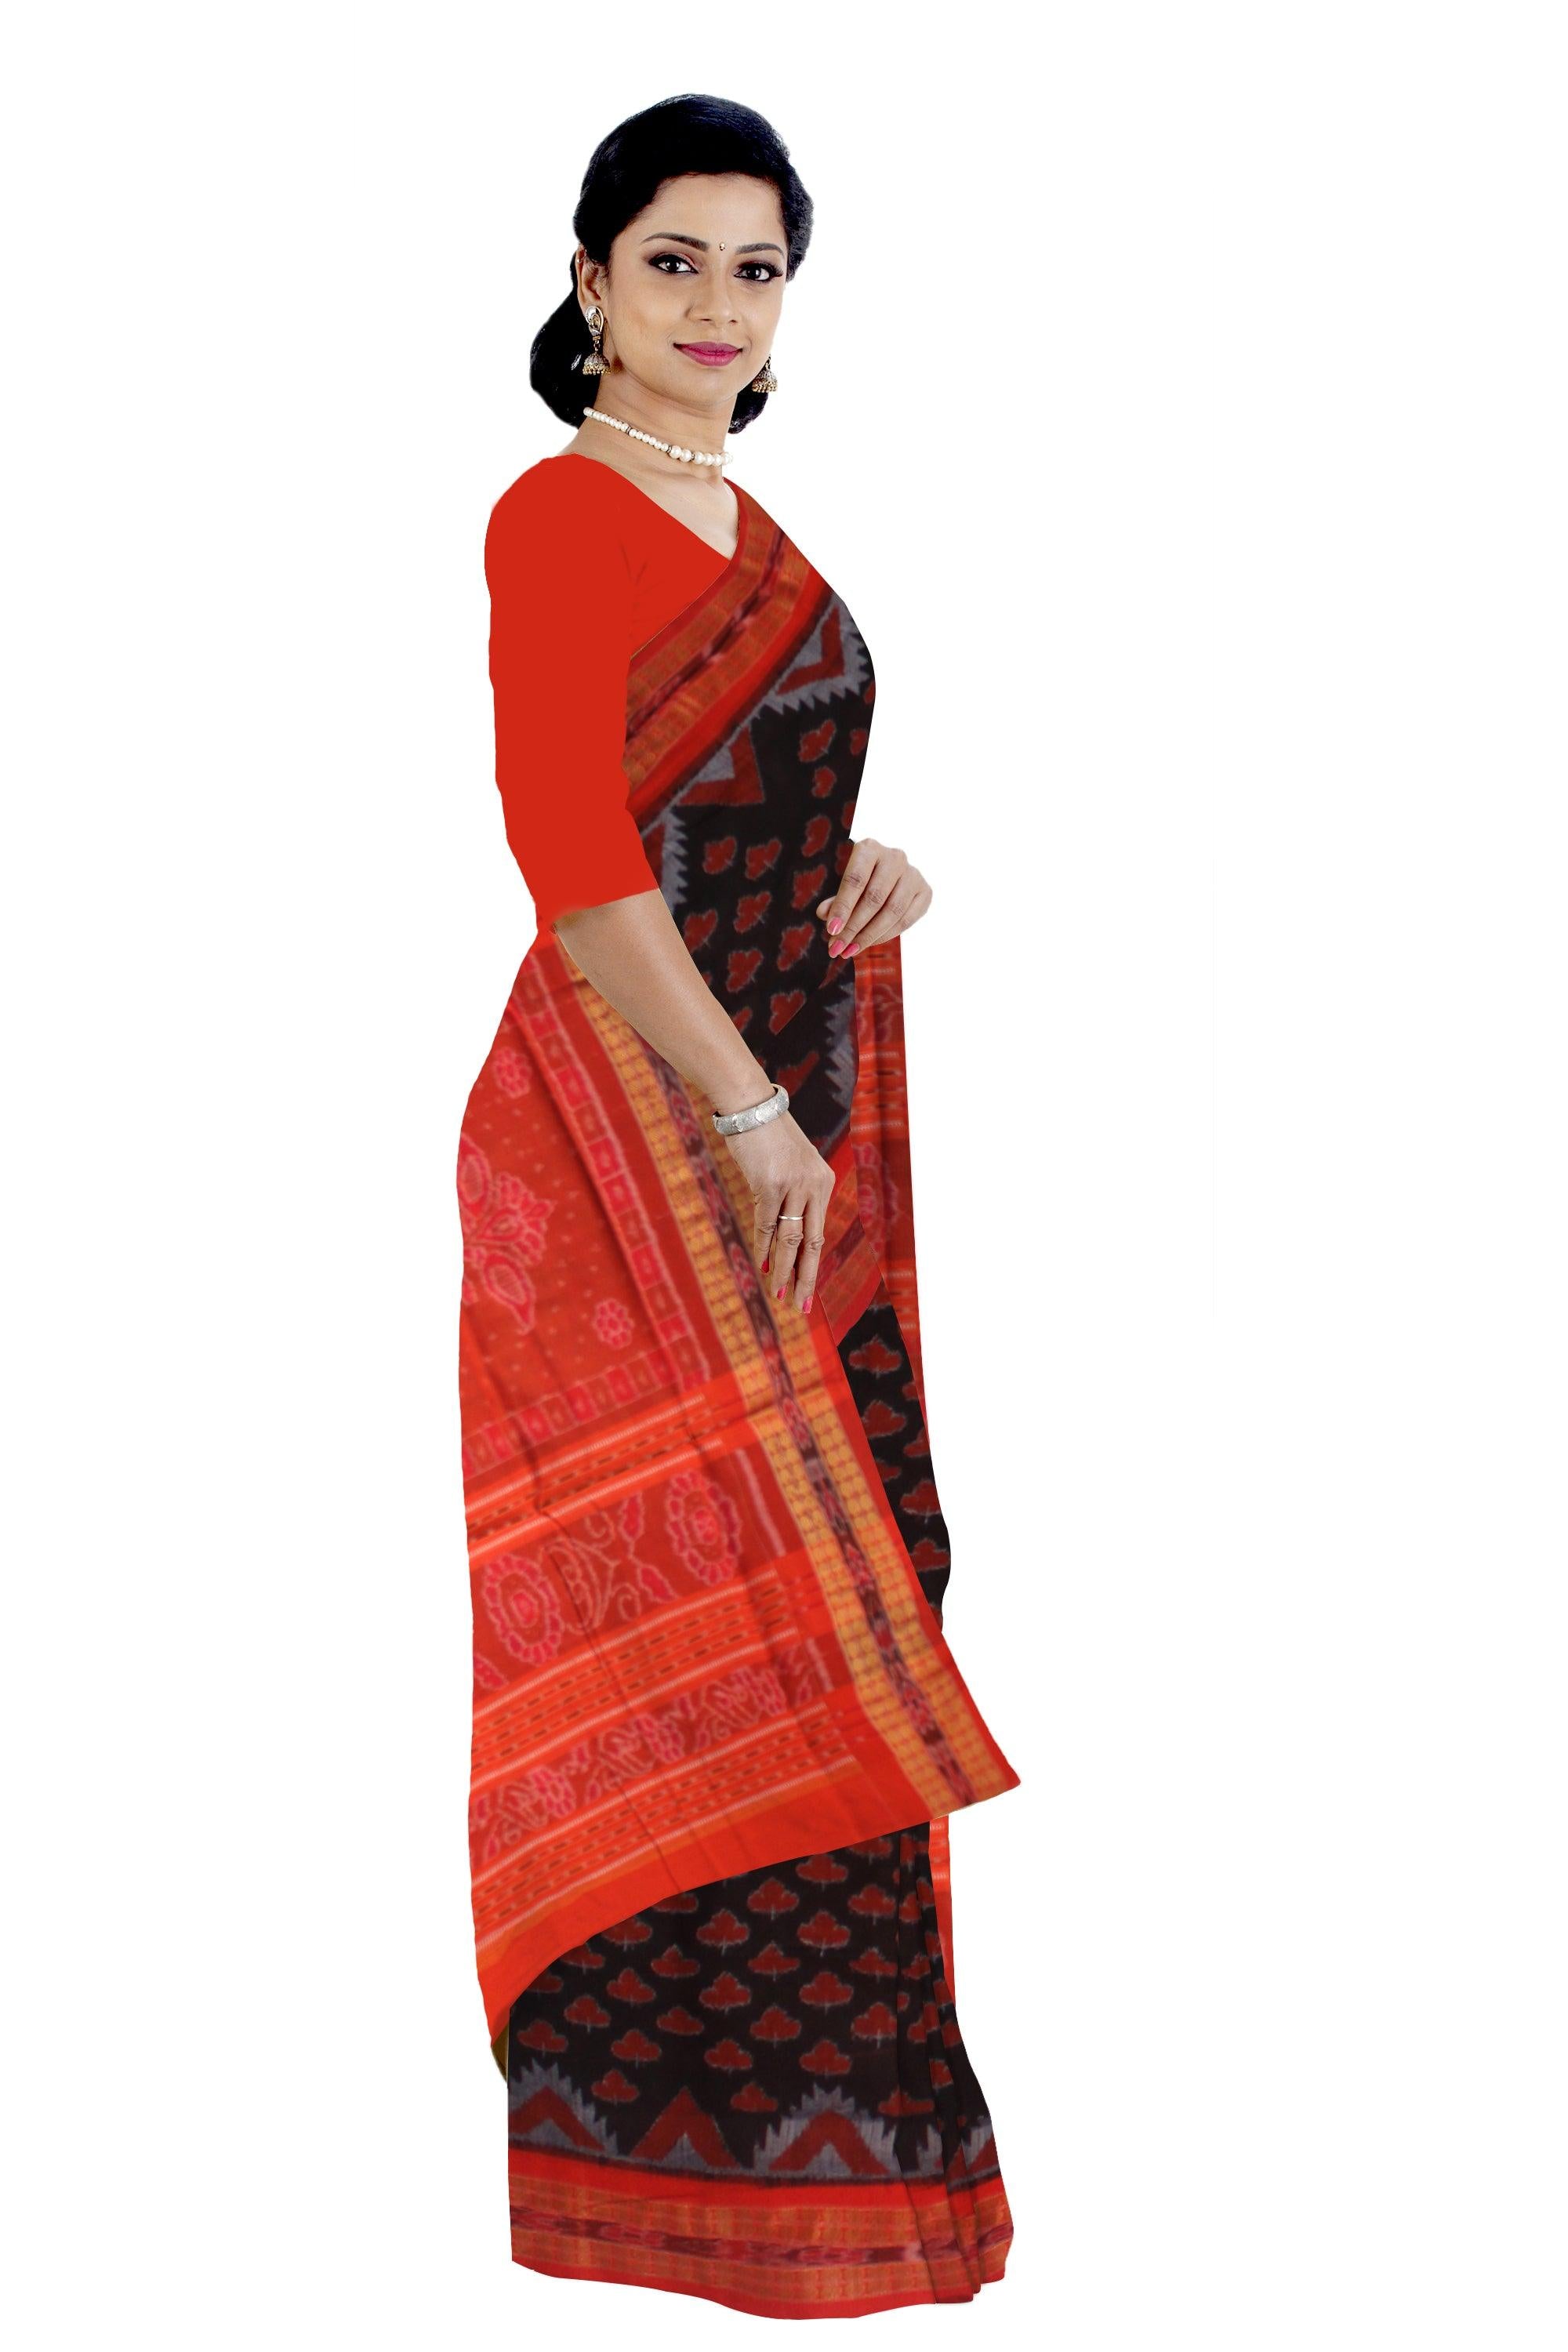 SMALL LIP AND KUMBHA PATTERN PURE COTTON SAREE IN BLACK AND RED COLOR,  WITH OUT BLOUSE PIECE. - Koshali Arts & Crafts Enterprise